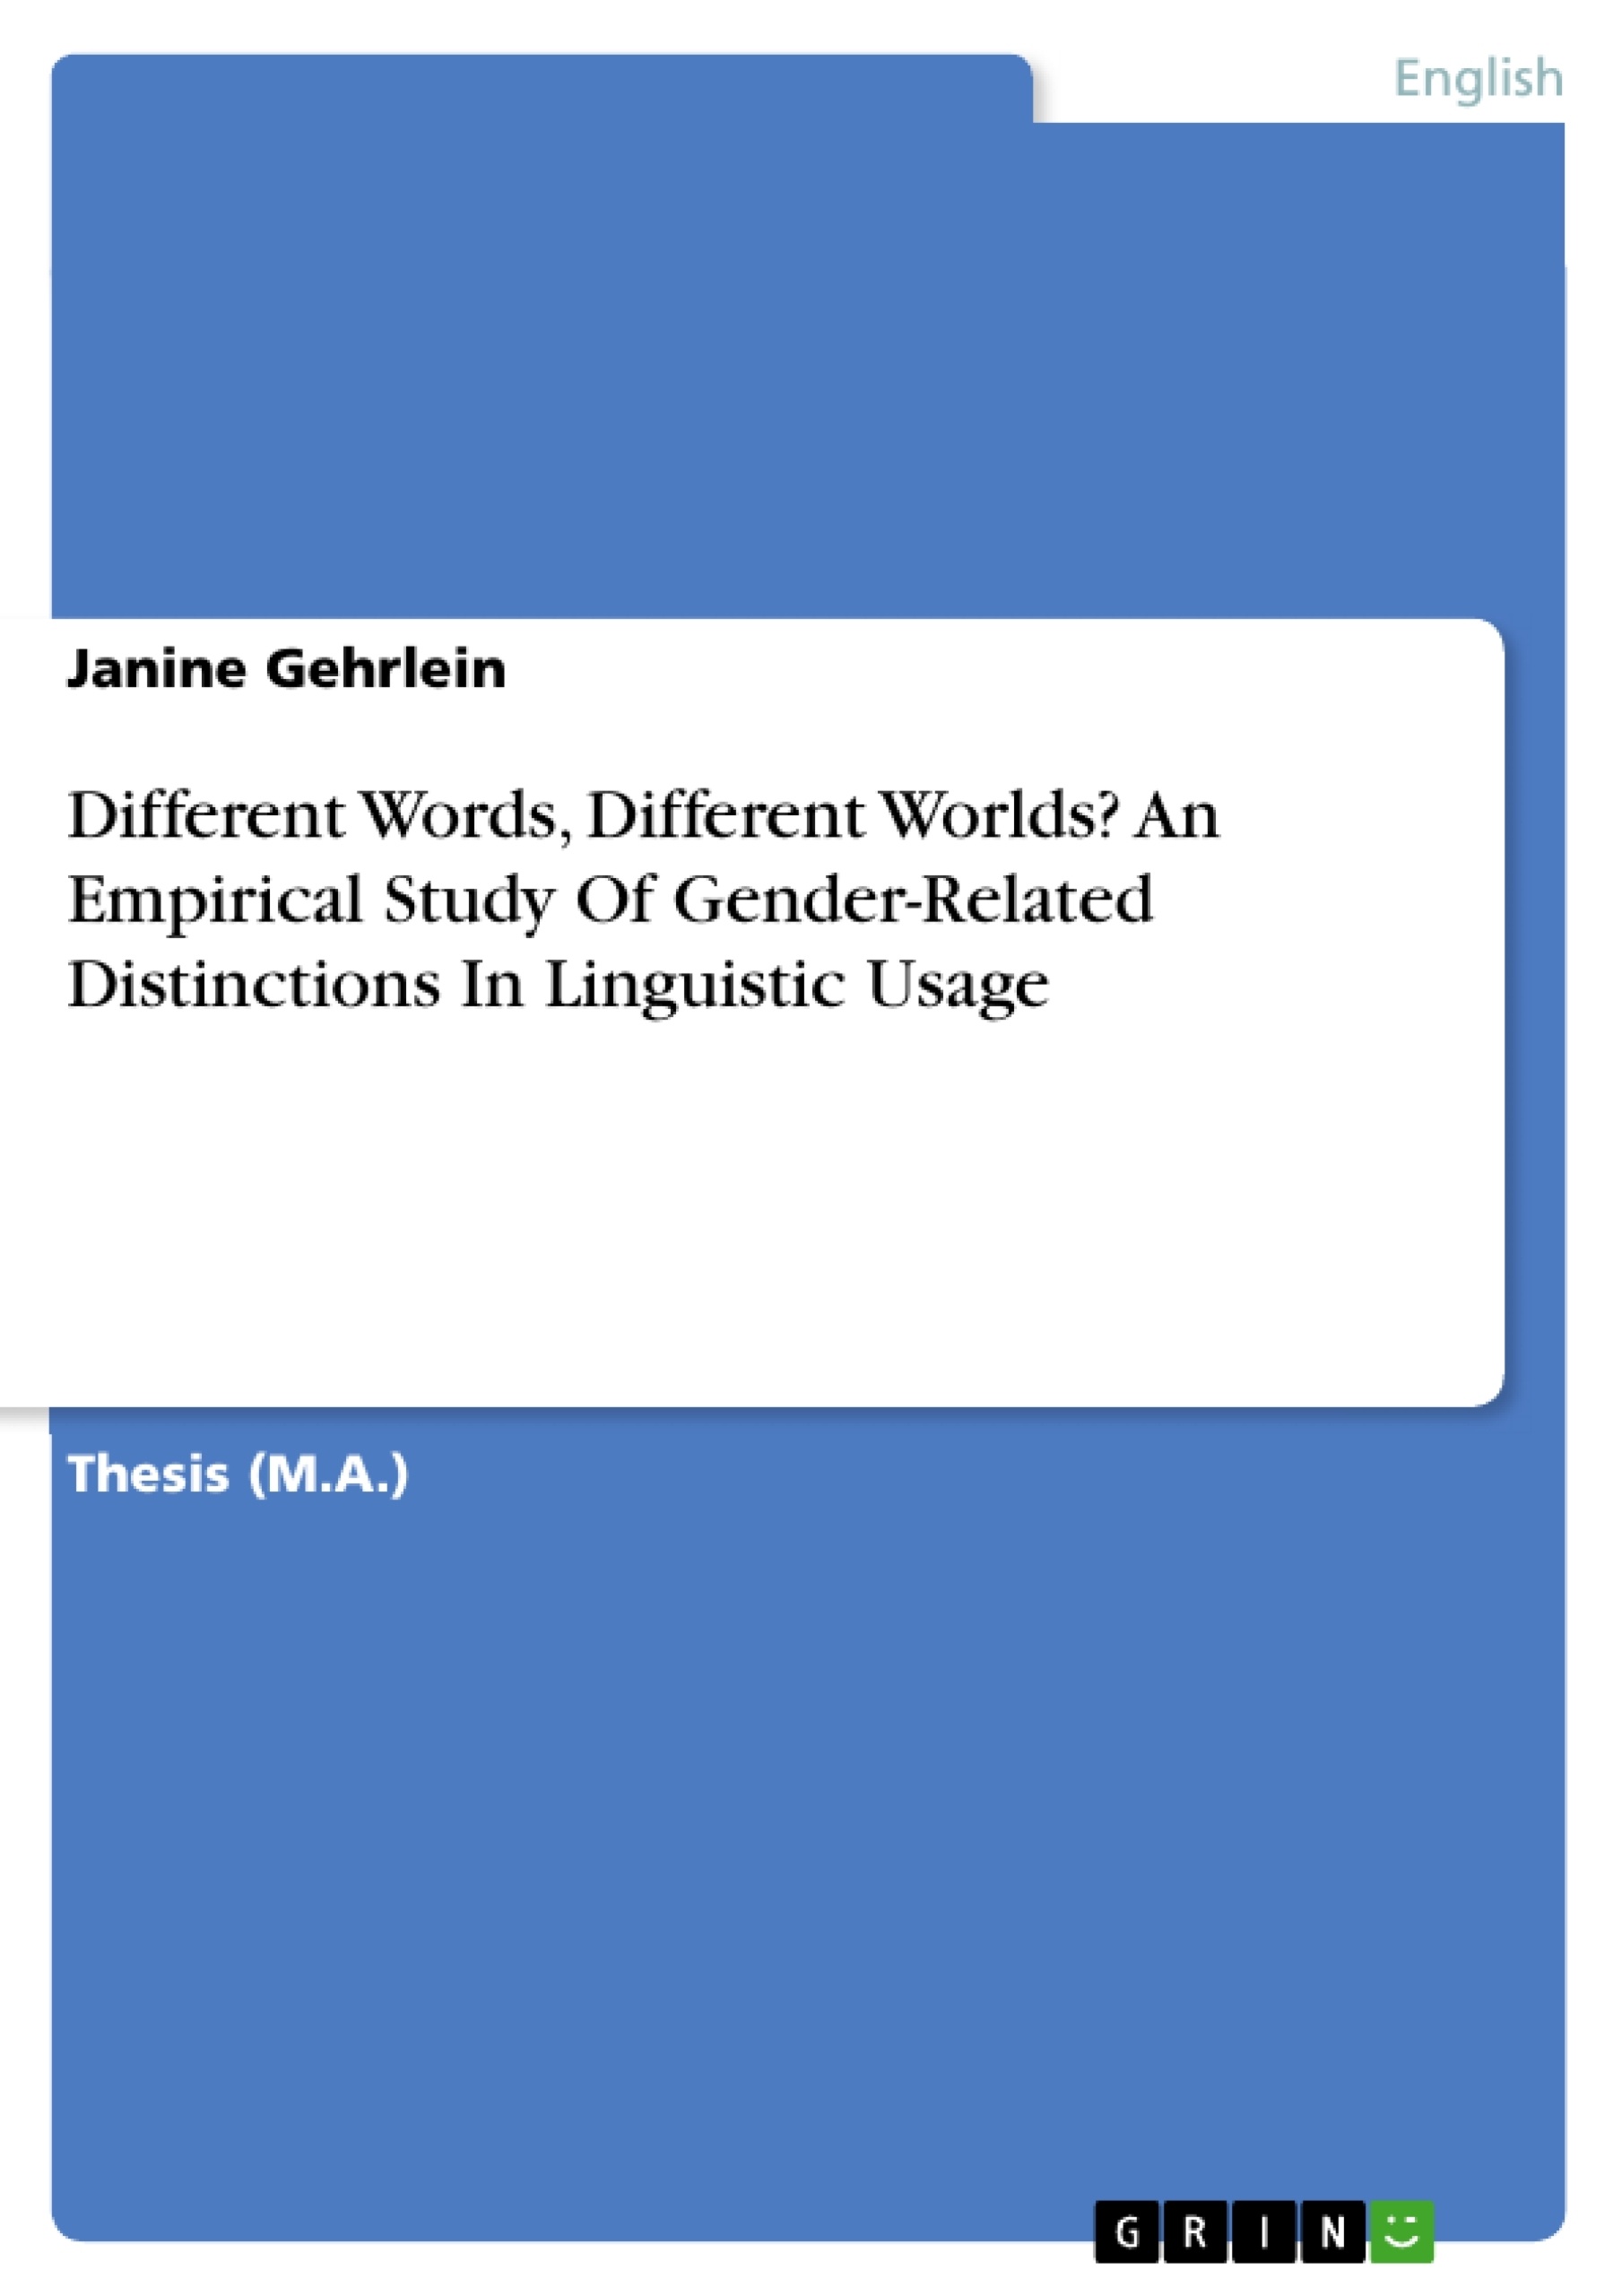 Título: Different Words, Different Worlds? An Empirical Study Of Gender-Related Distinctions In Linguistic Usage